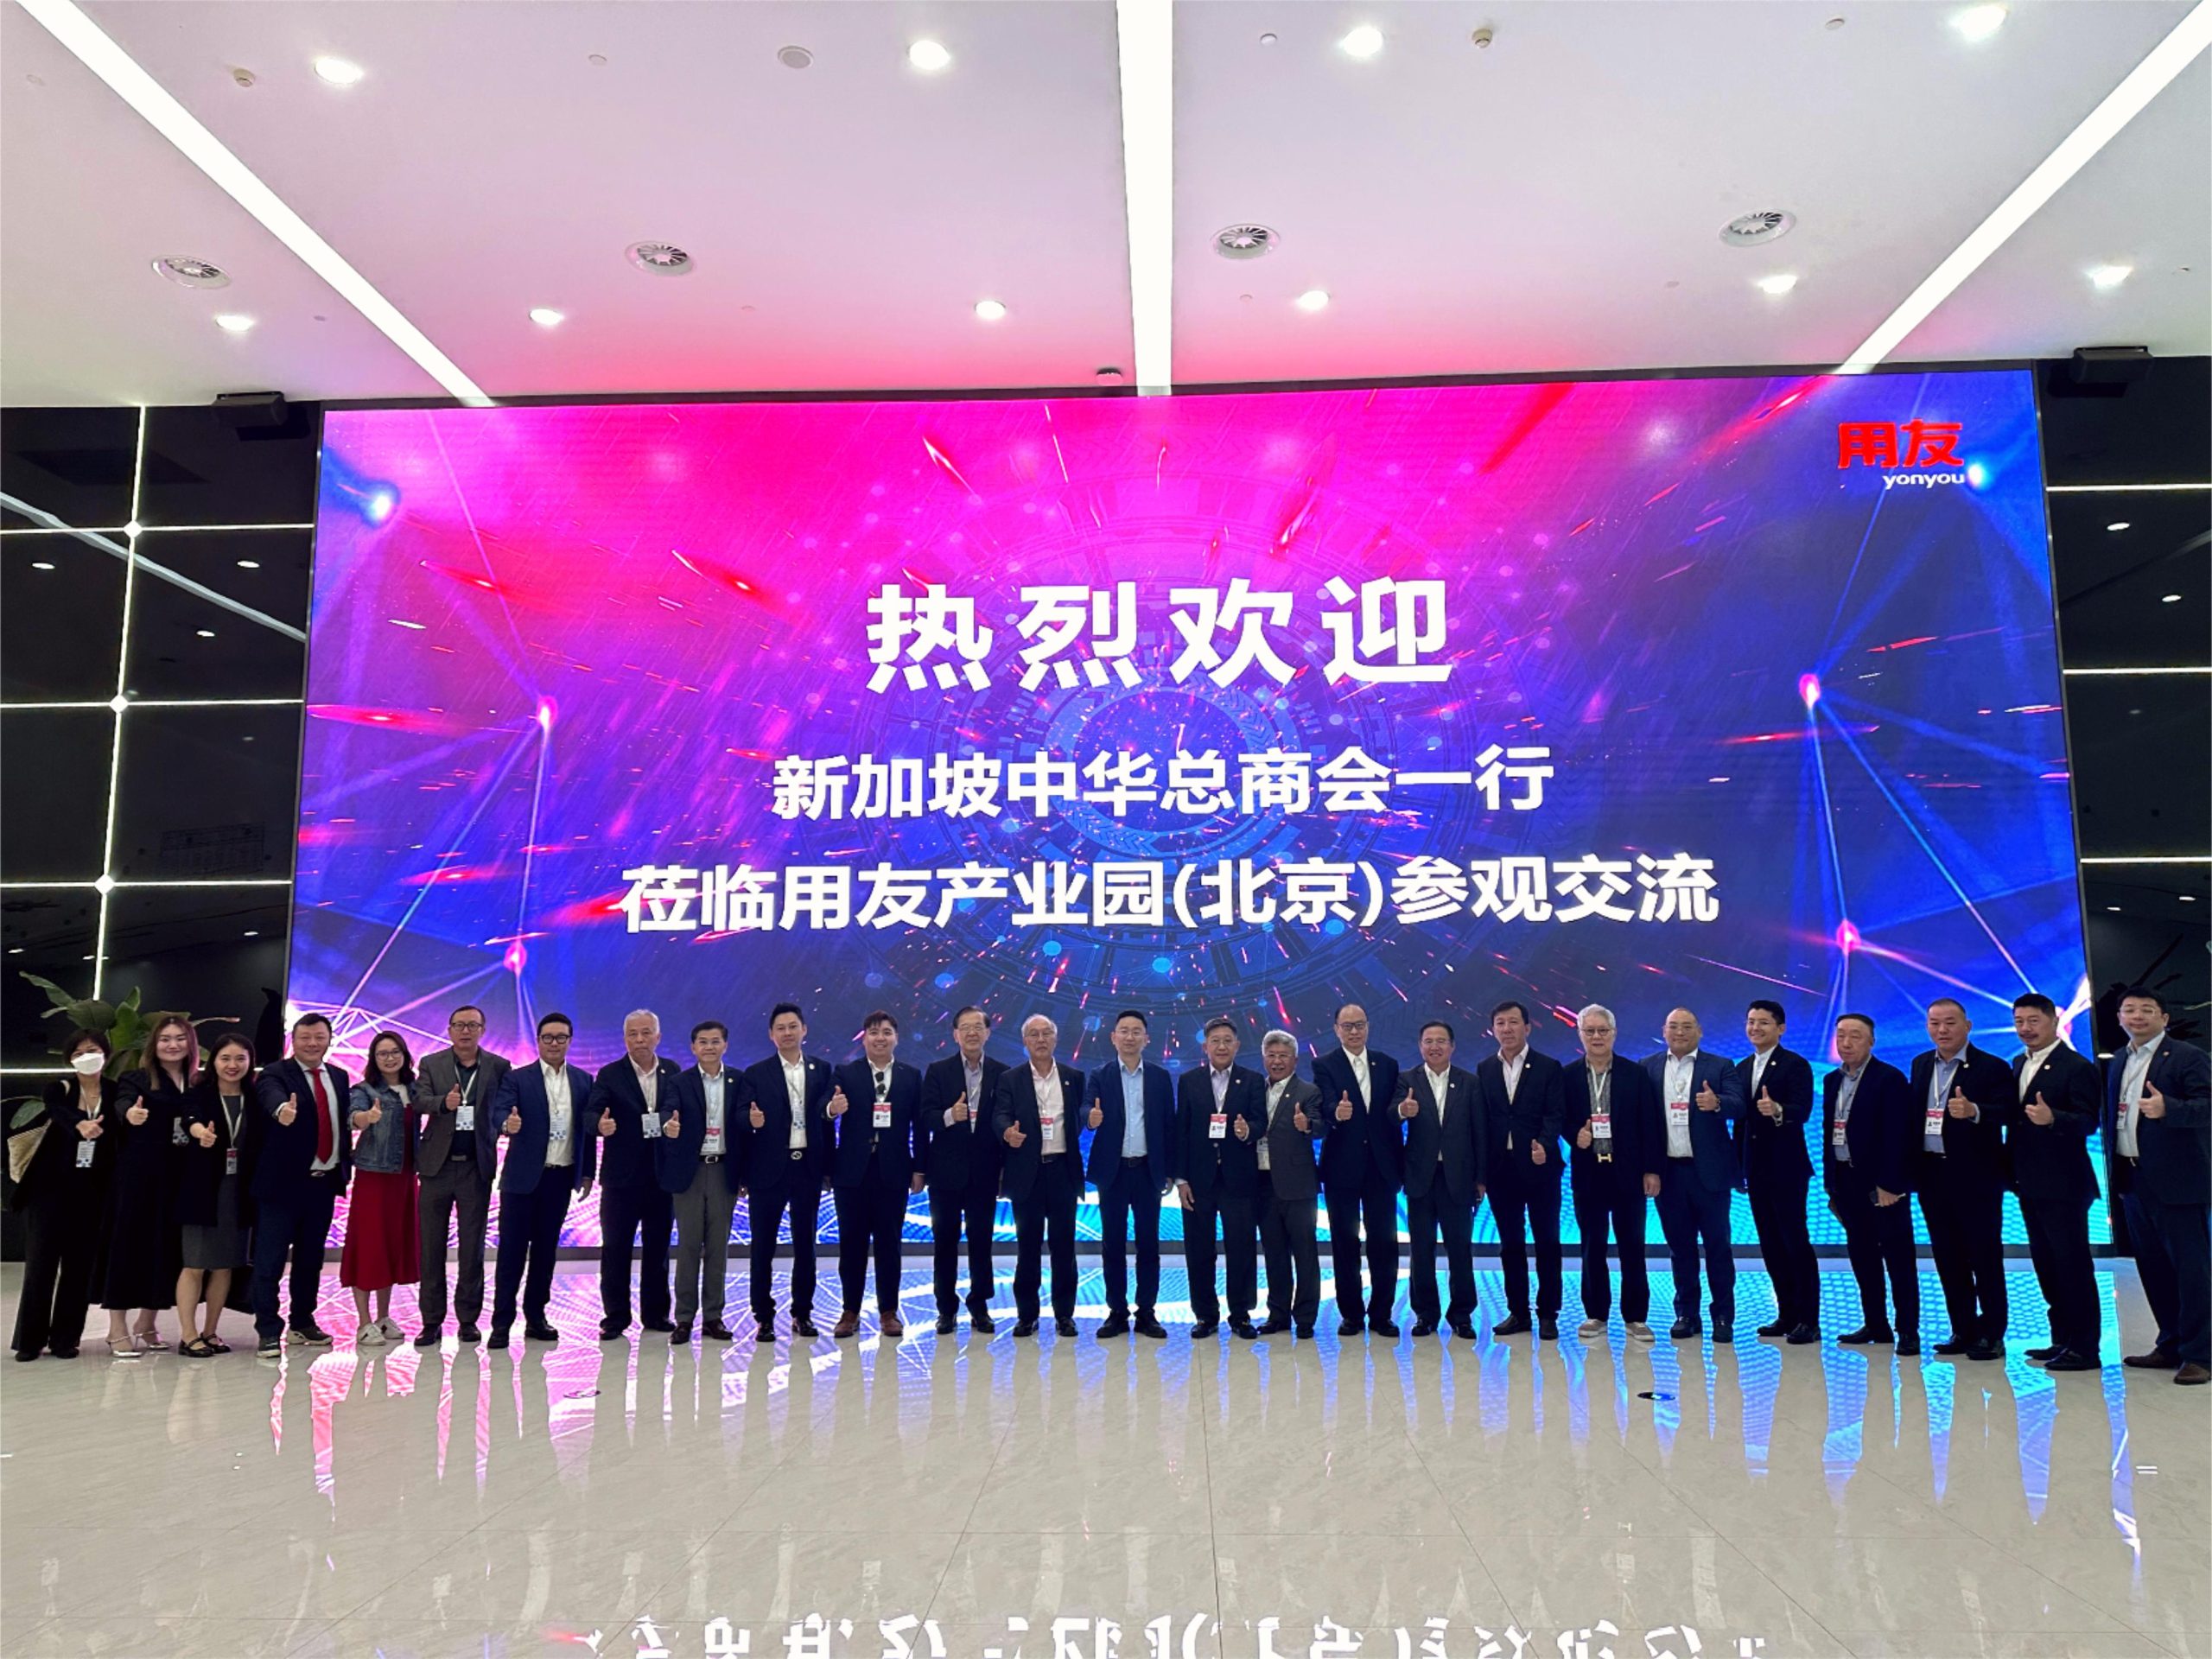 Singapore Chinese Chamber of Commerce & Industry visited Beijing Yonyou Digital Intelligence Enterprise Experience Center